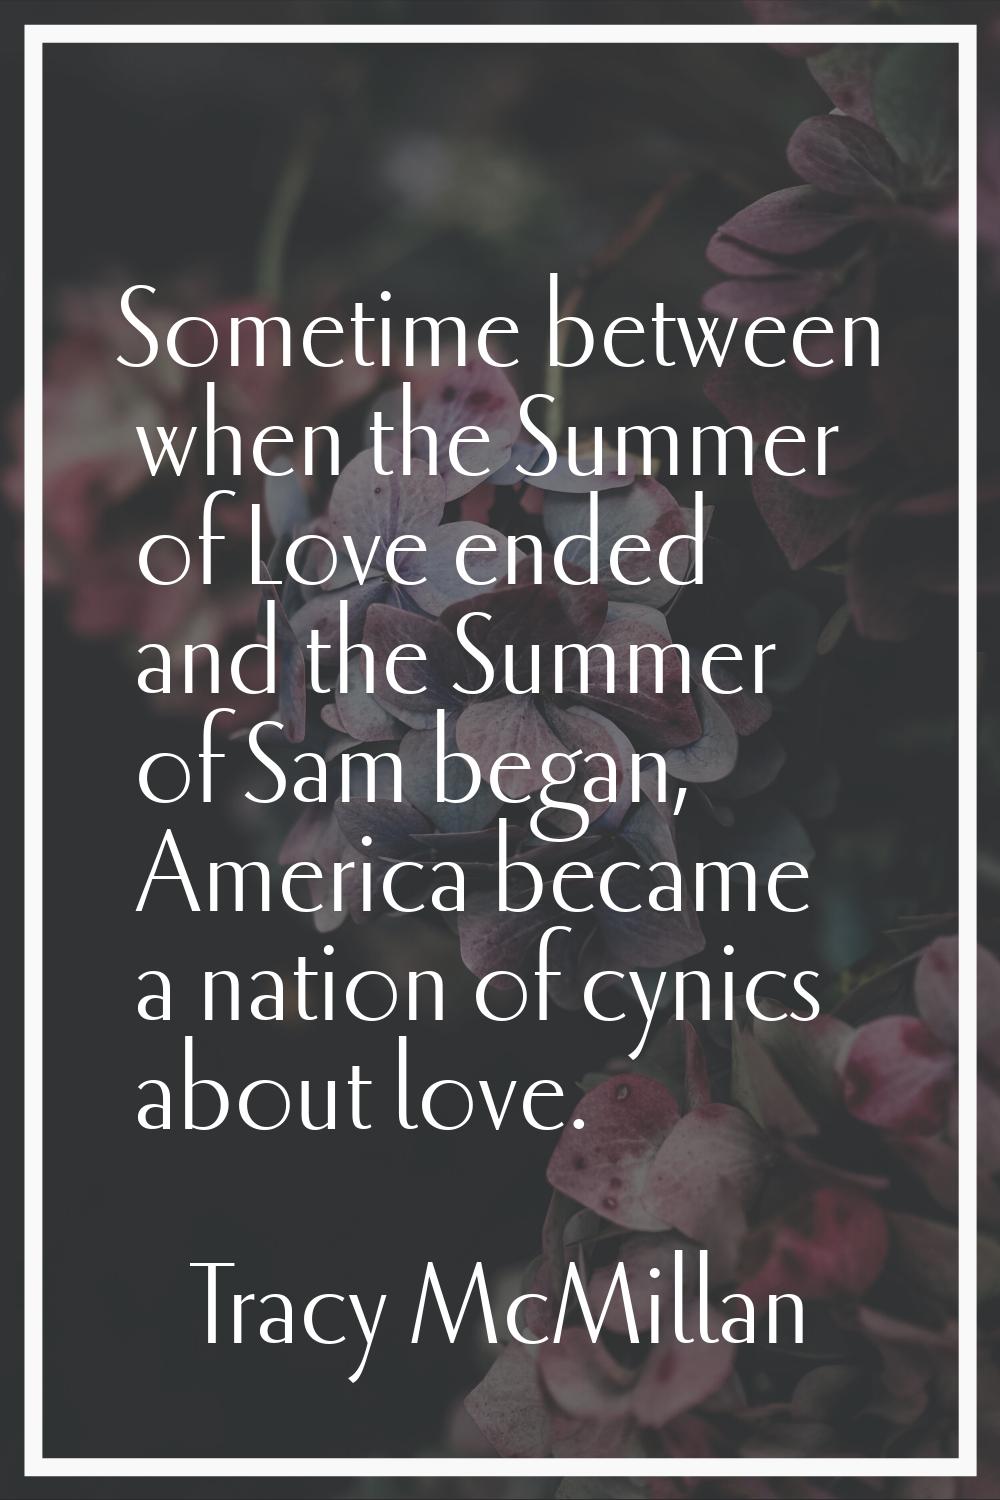 Sometime between when the Summer of Love ended and the Summer of Sam began, America became a nation